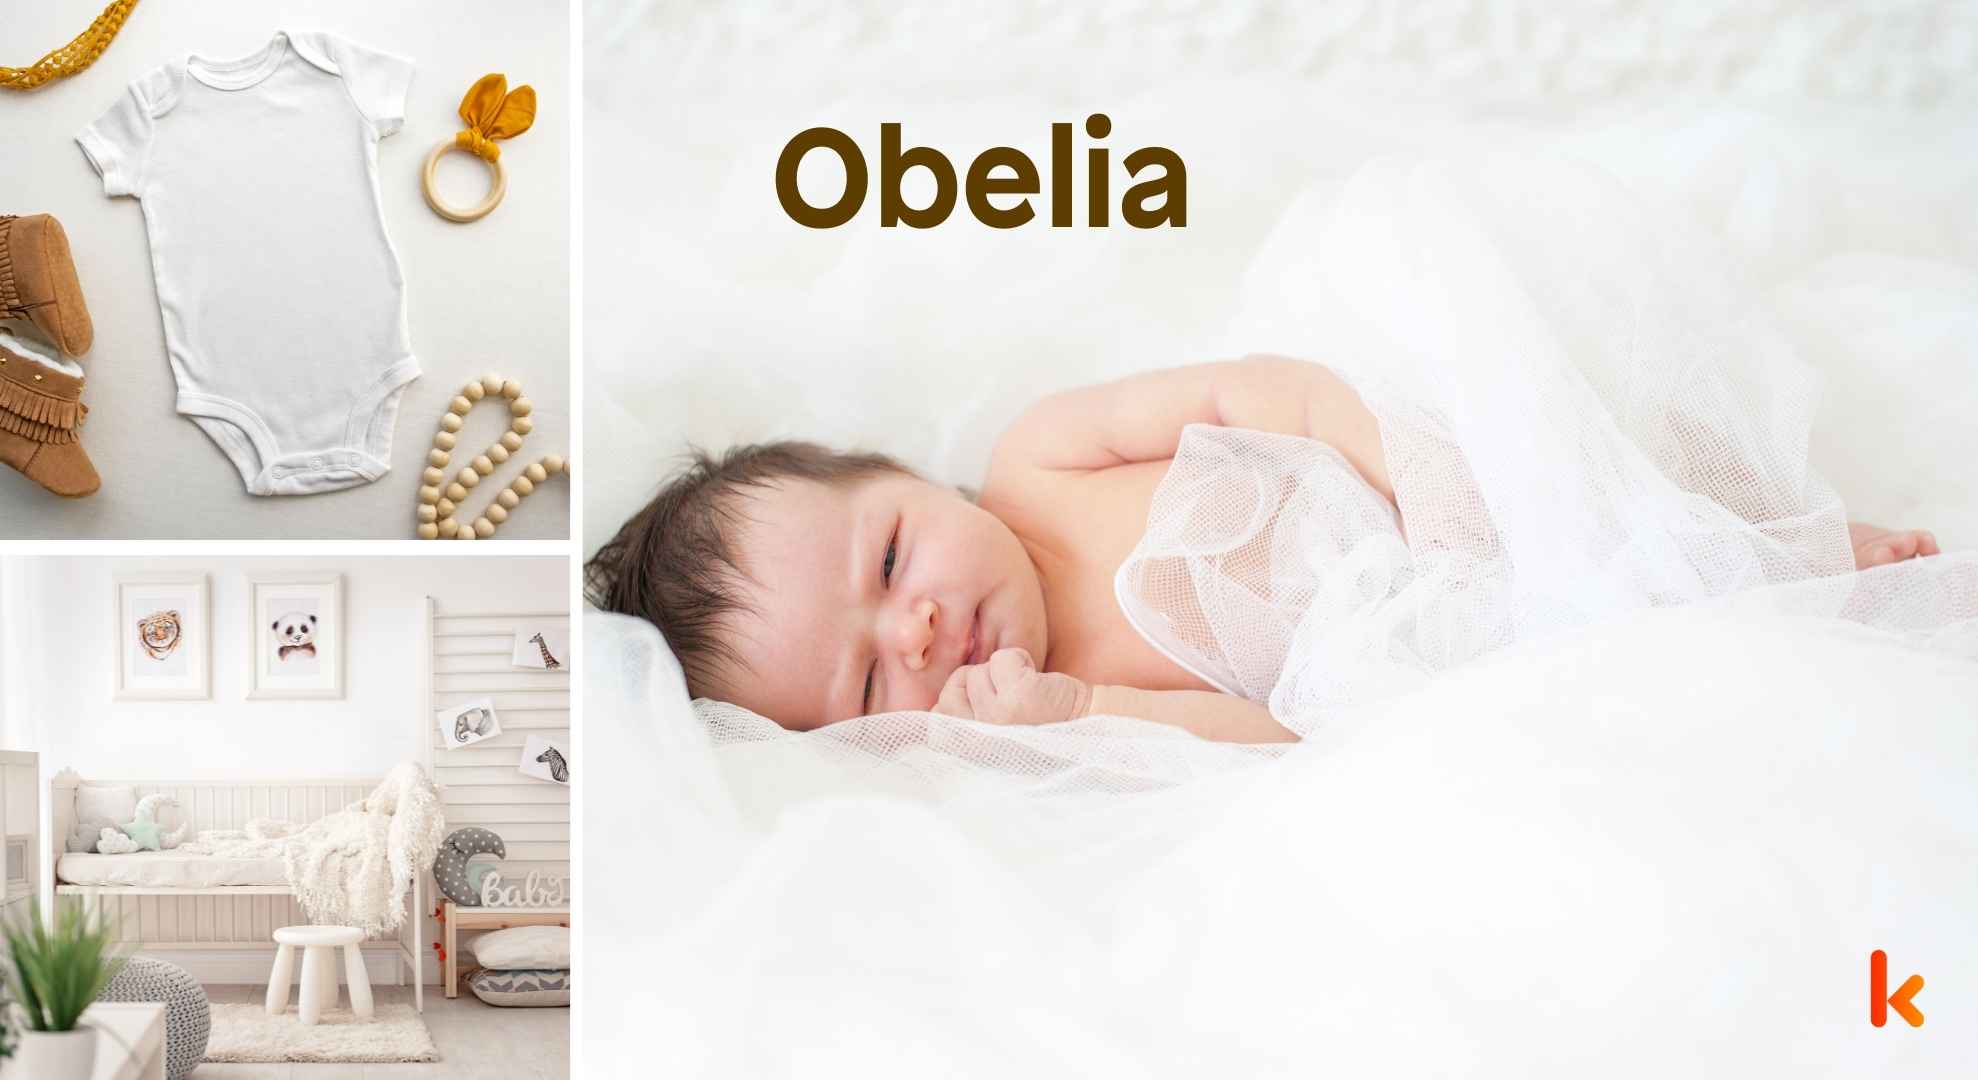 Meaning of the name Obelia